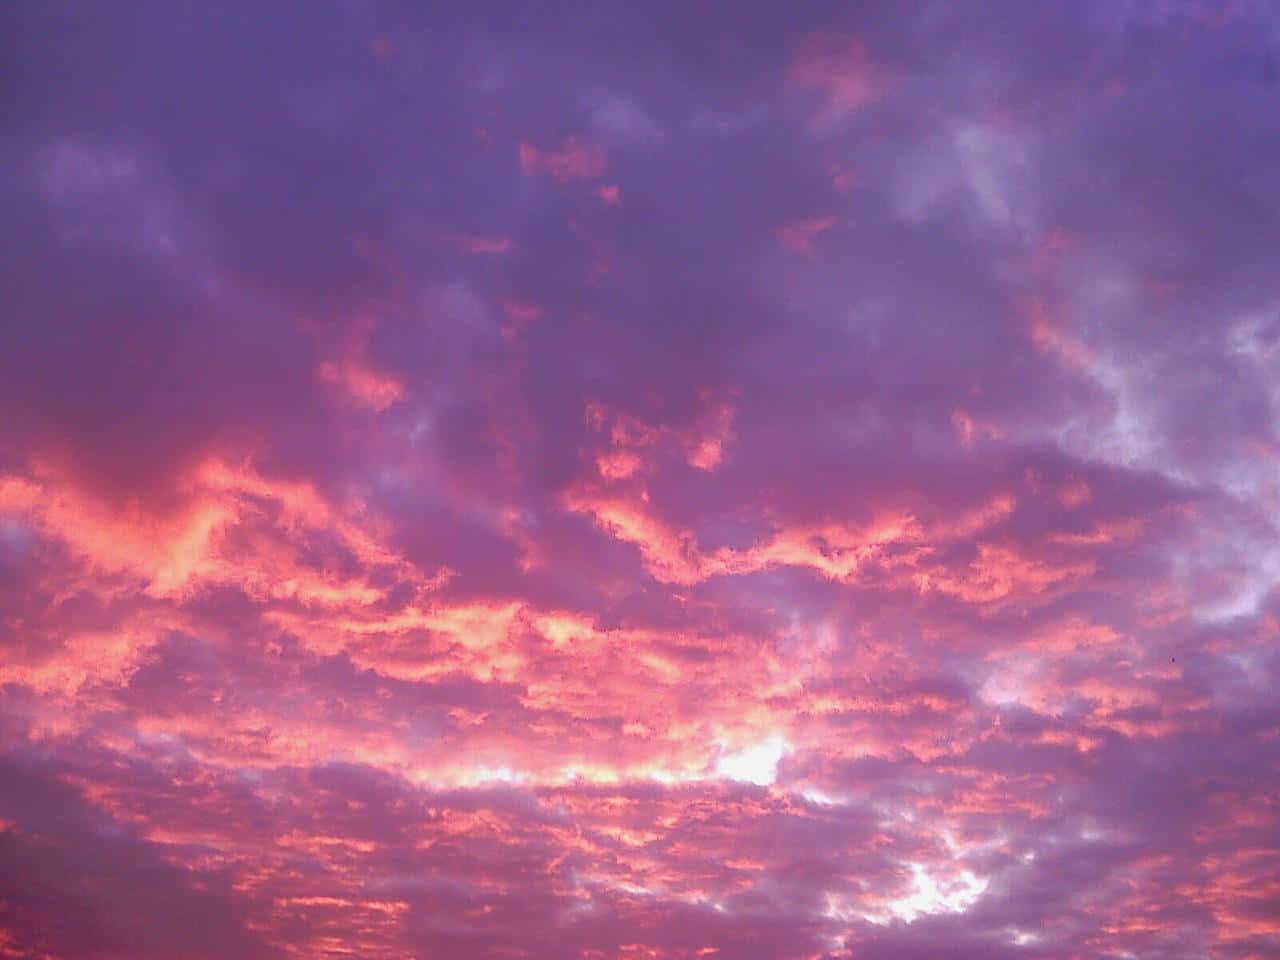 Dreamy Pink Sky at Sunset Wallpaper